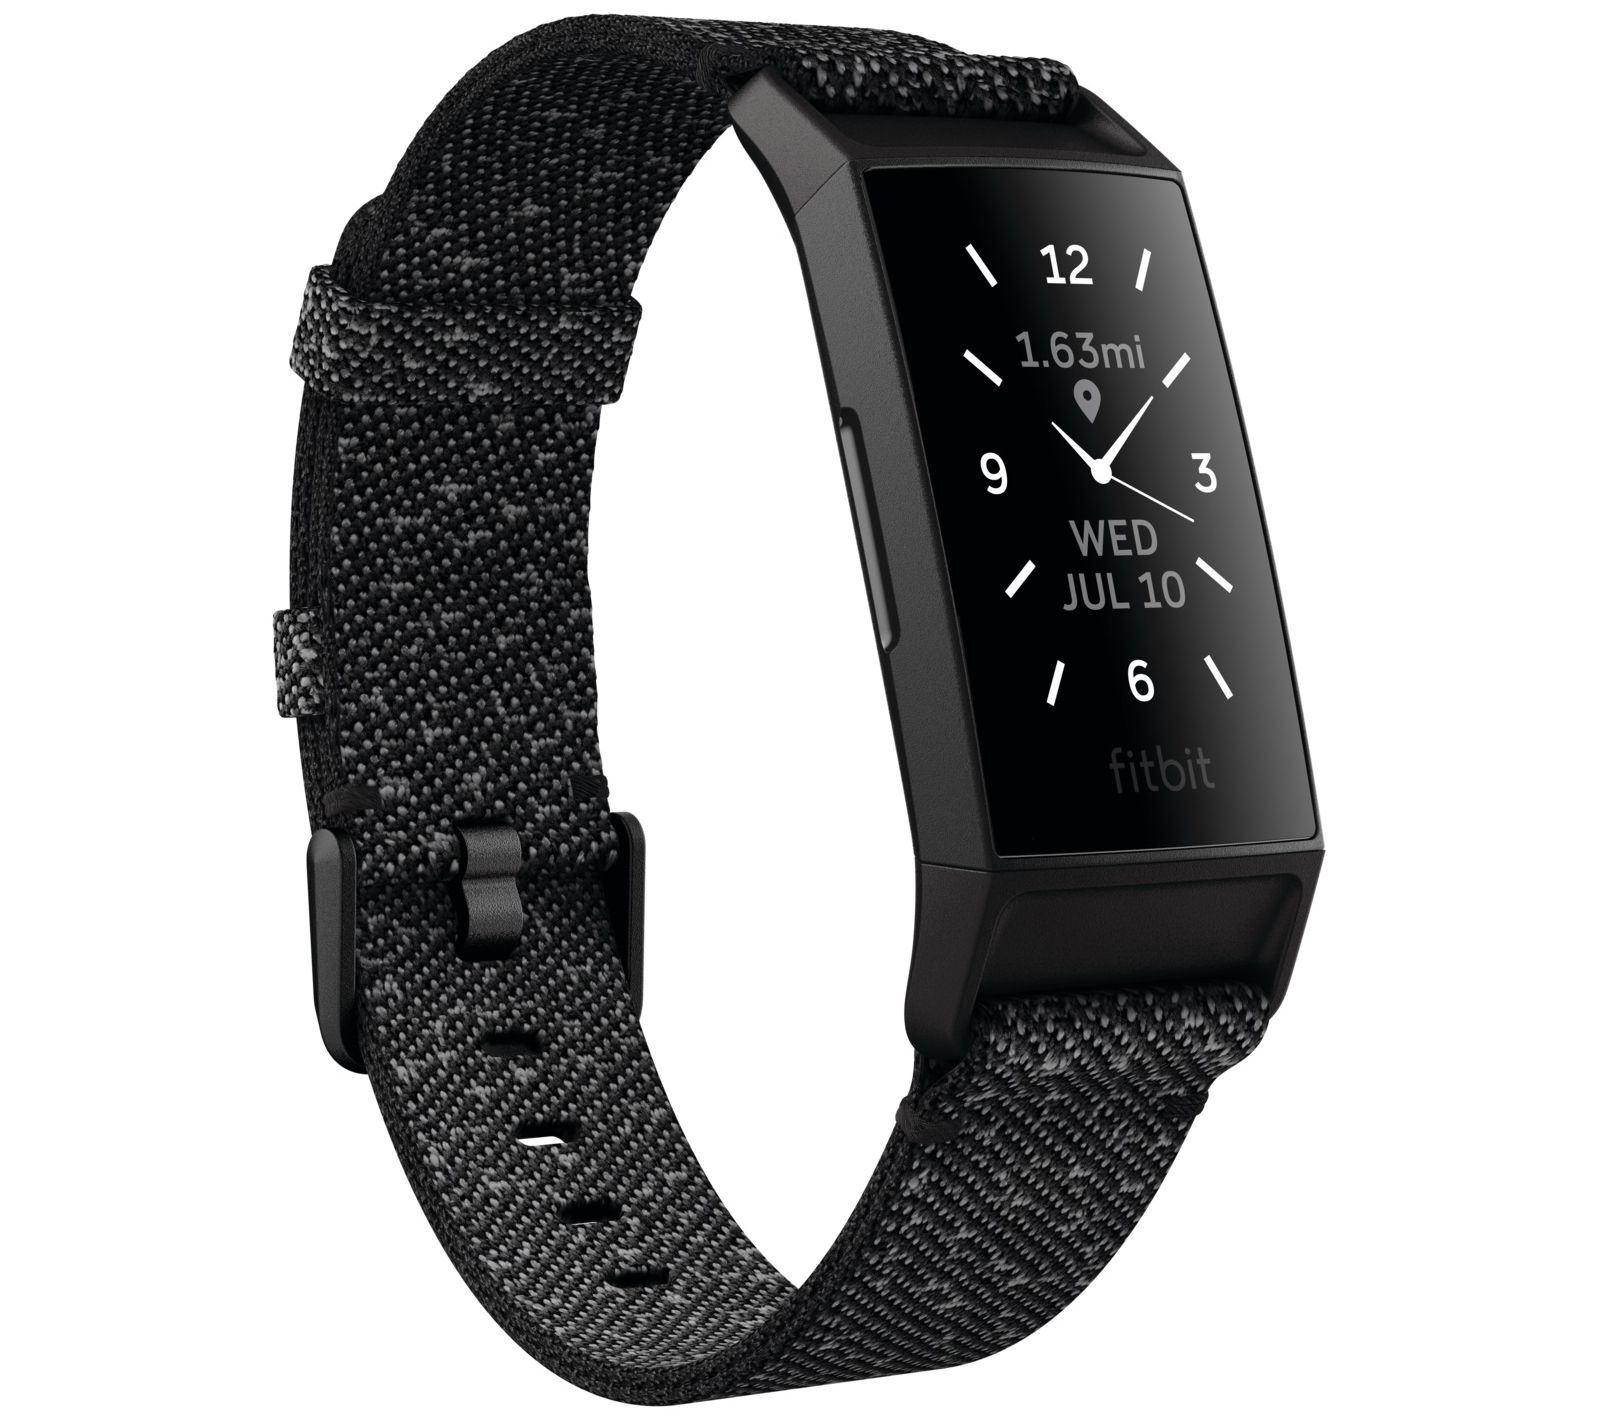 Fitbit Charge 4 Special Edition Nfc Activity Tr Acker Qvc Com